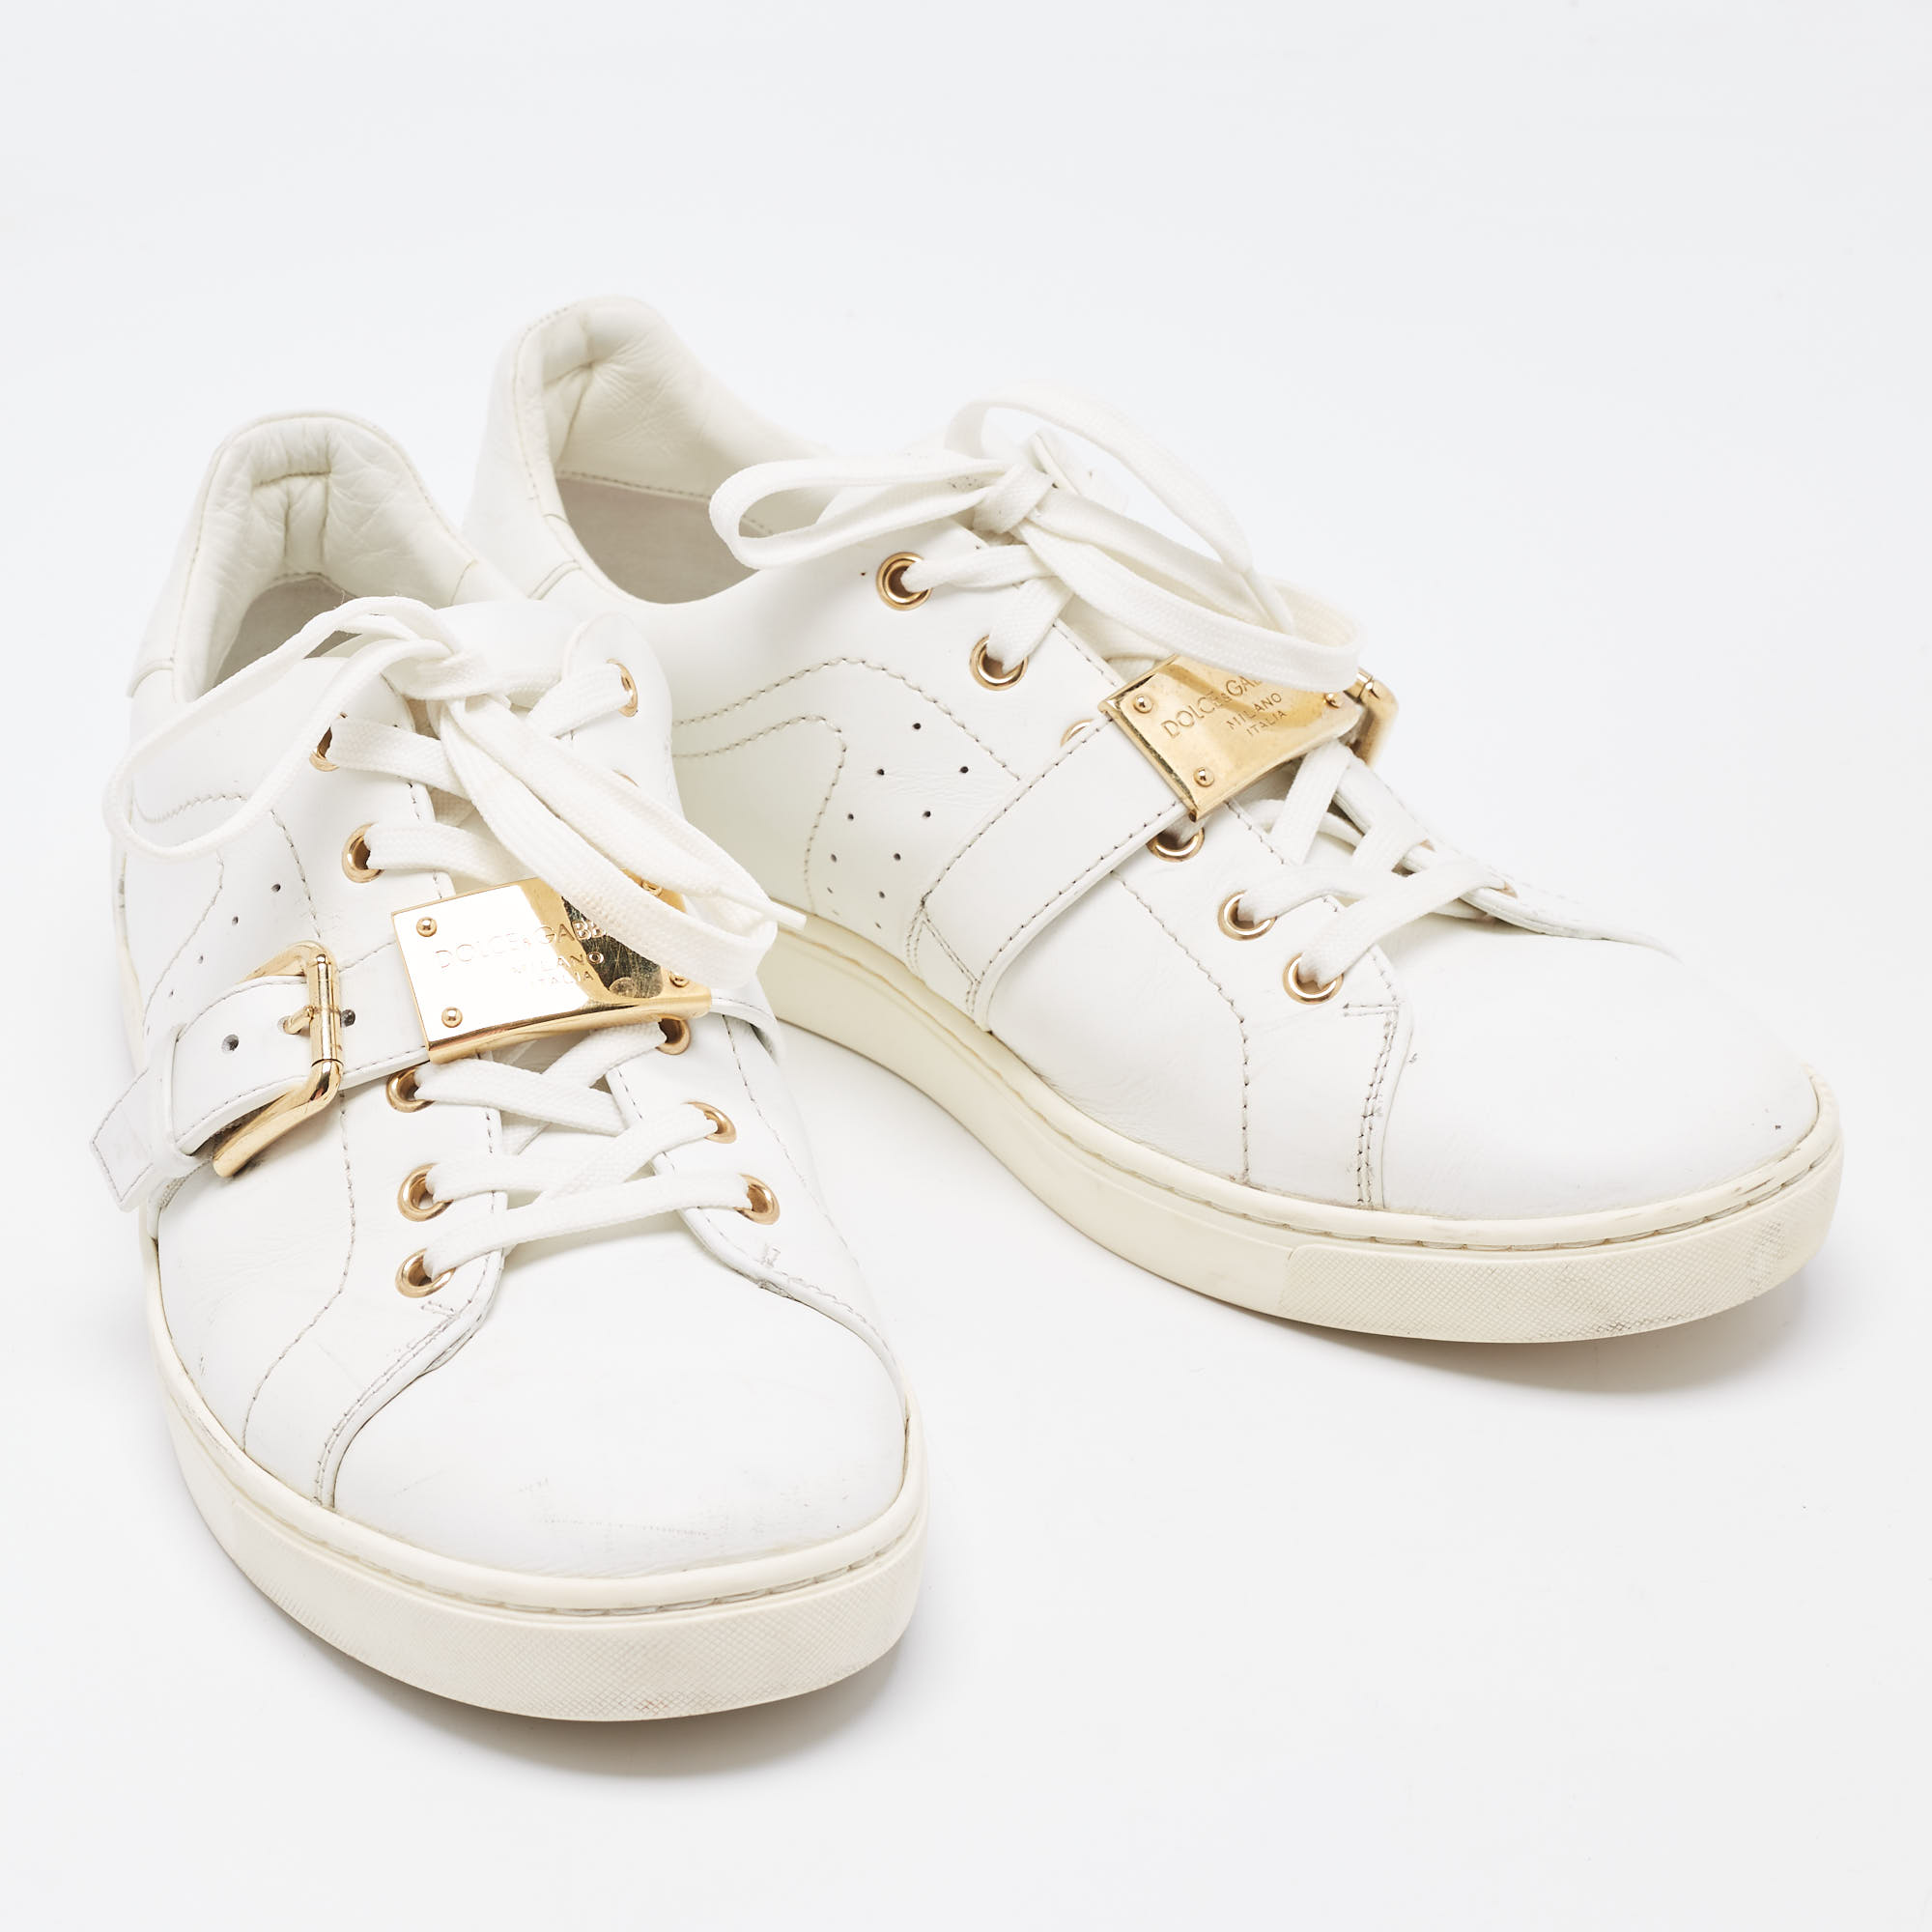 Dolce & Gabbana White Leather Lace Up And Buckle Low Top Sneakers Size 41